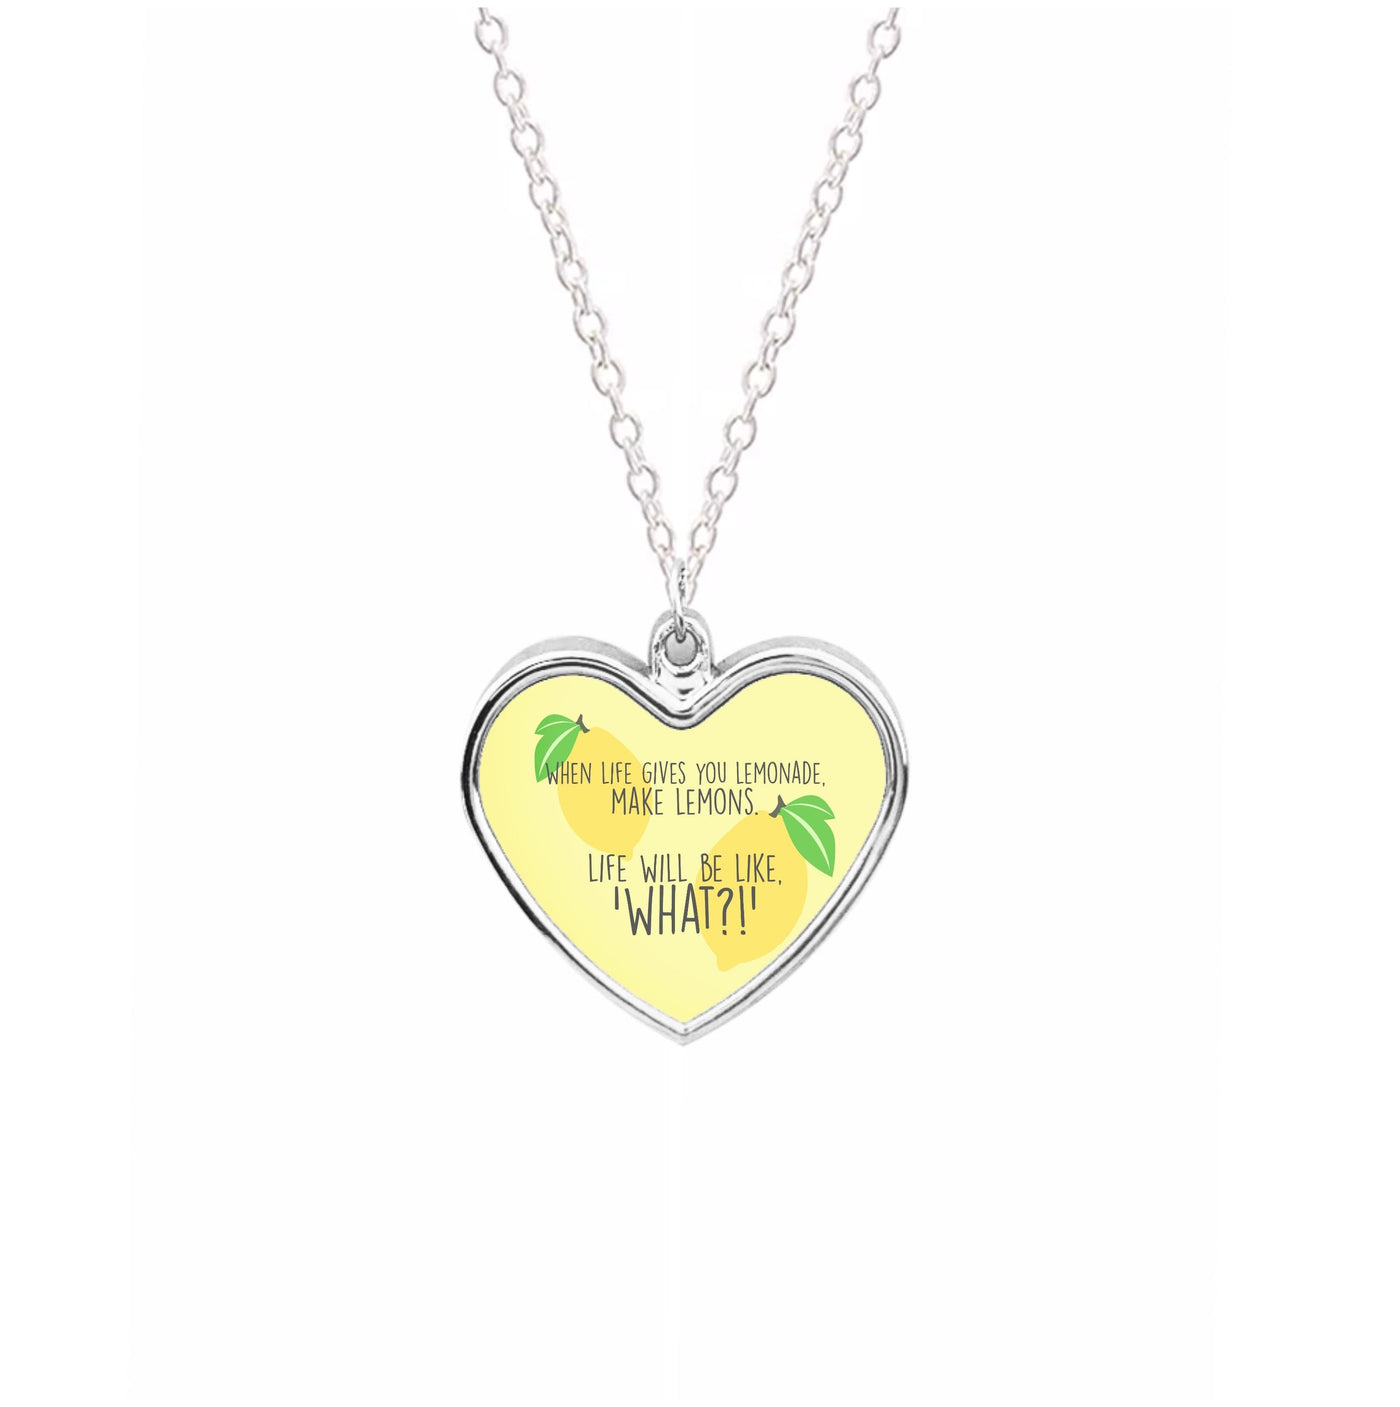 When Life Gives You Lemonade - TV Quotes Necklace